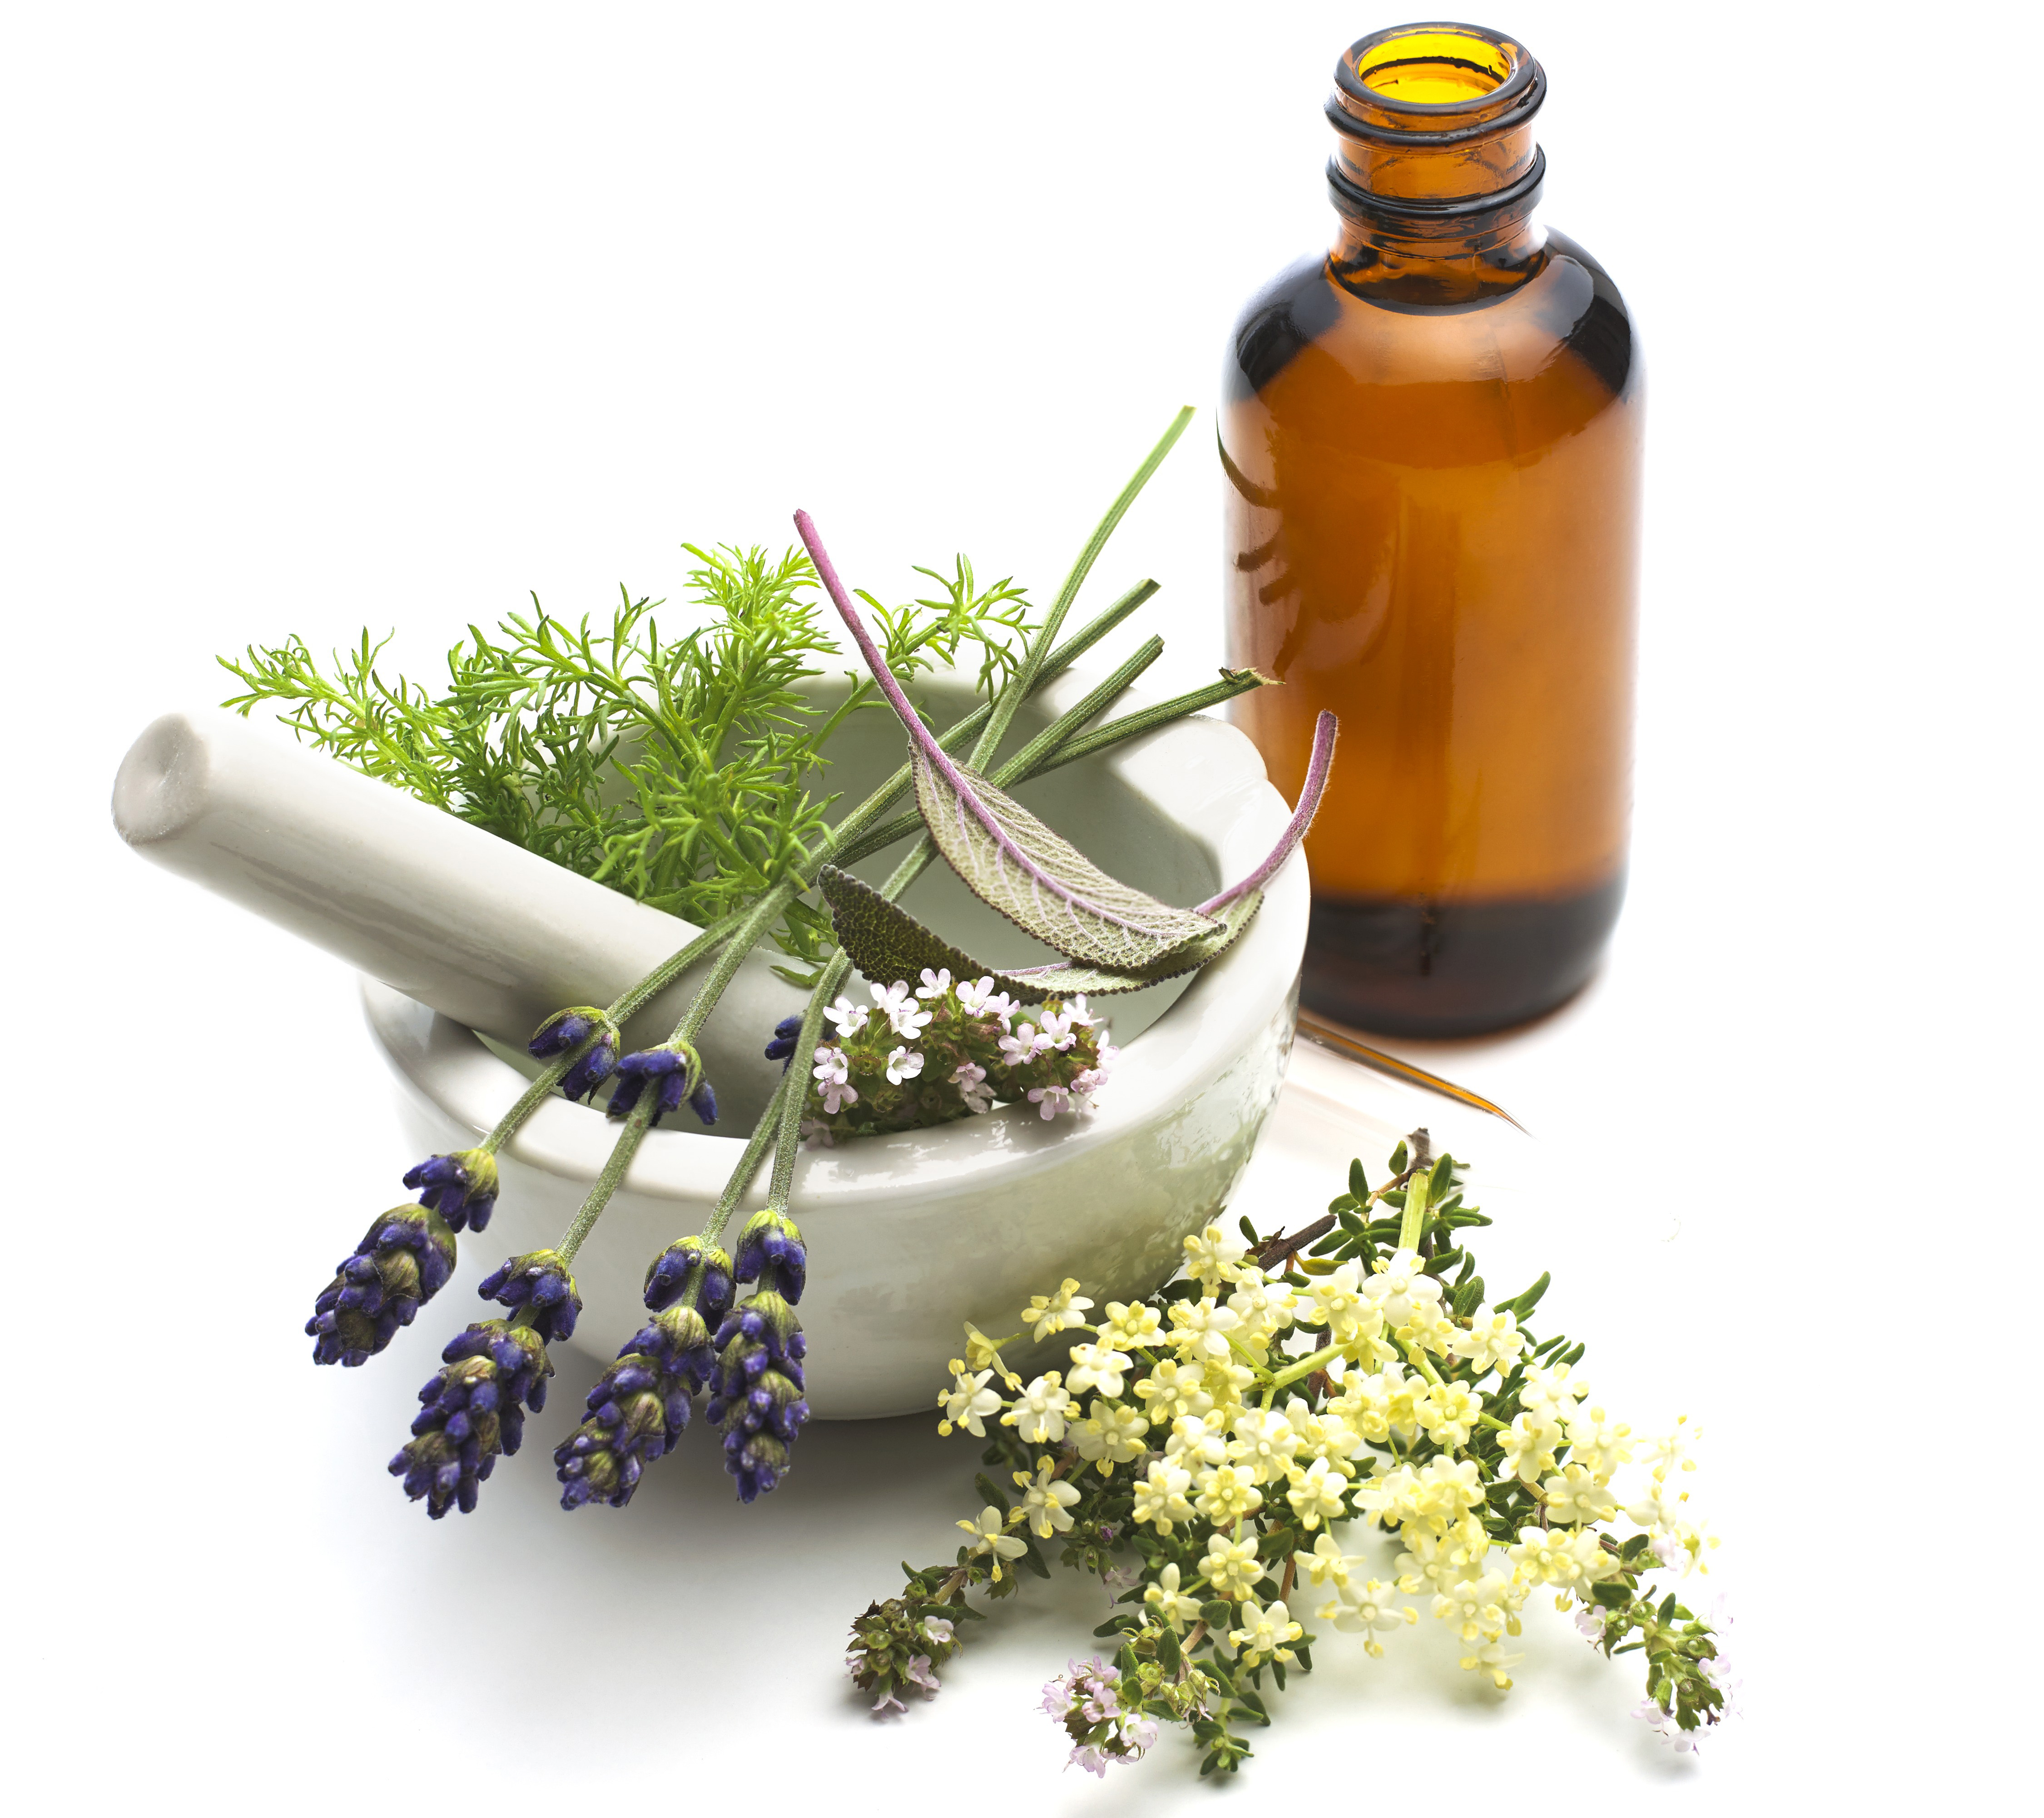 Popular Homeopathic Remedies To Treat Common Ailments